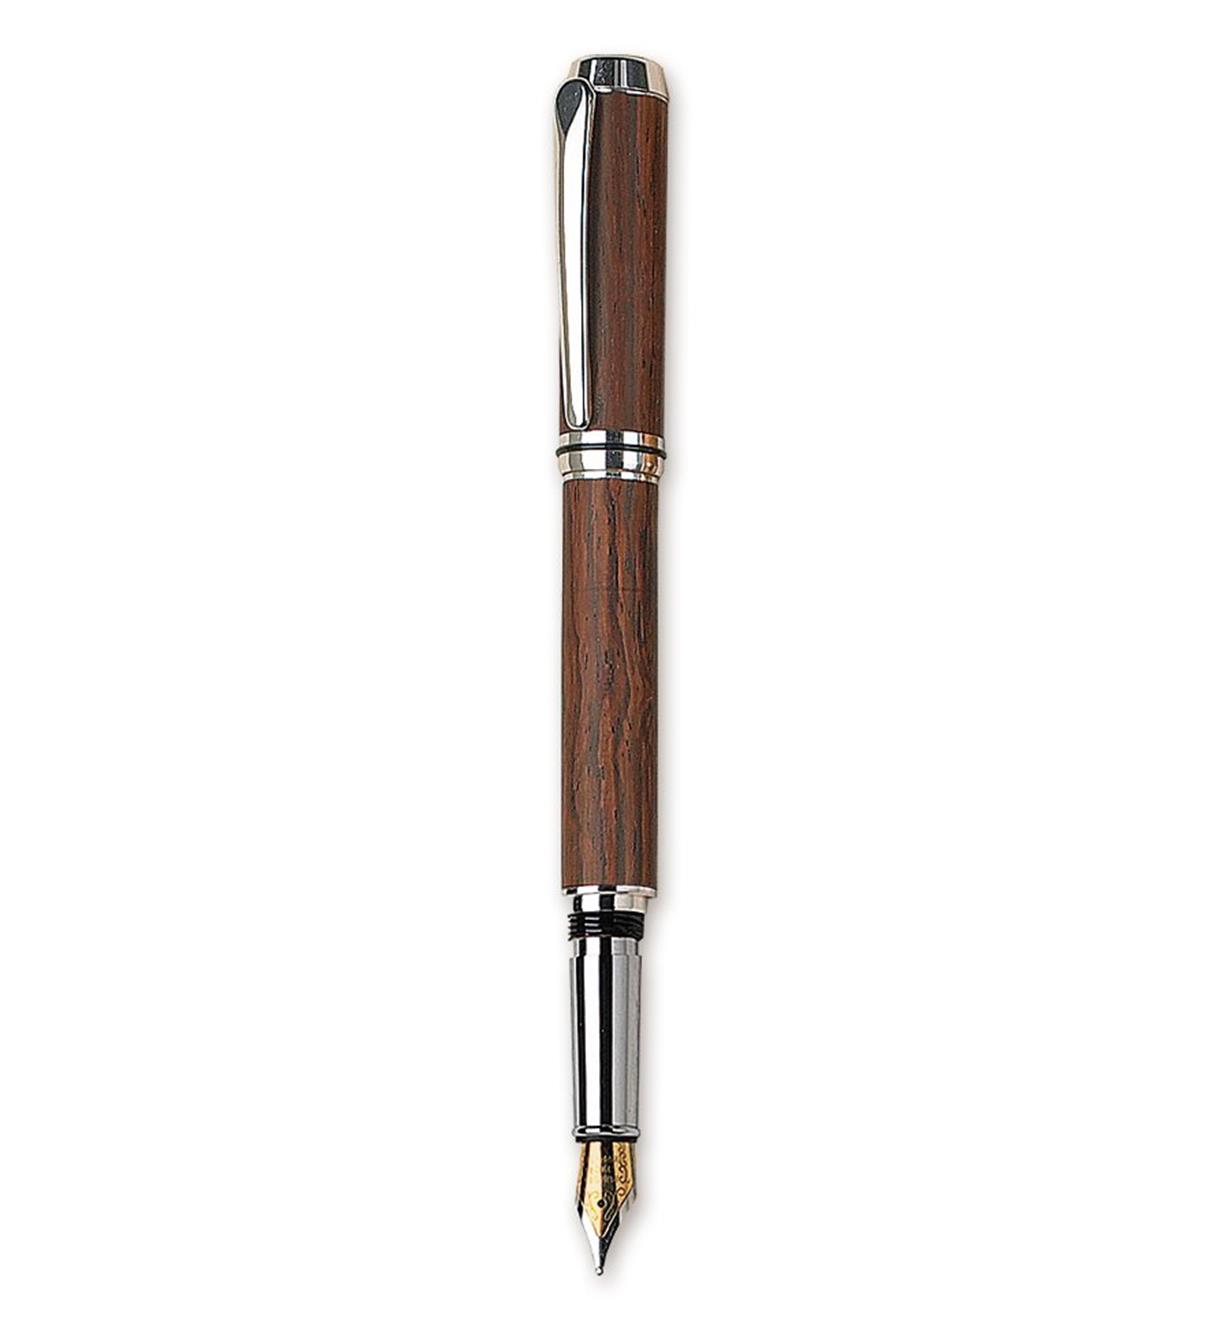 Example of completed Baron Fountain Pen